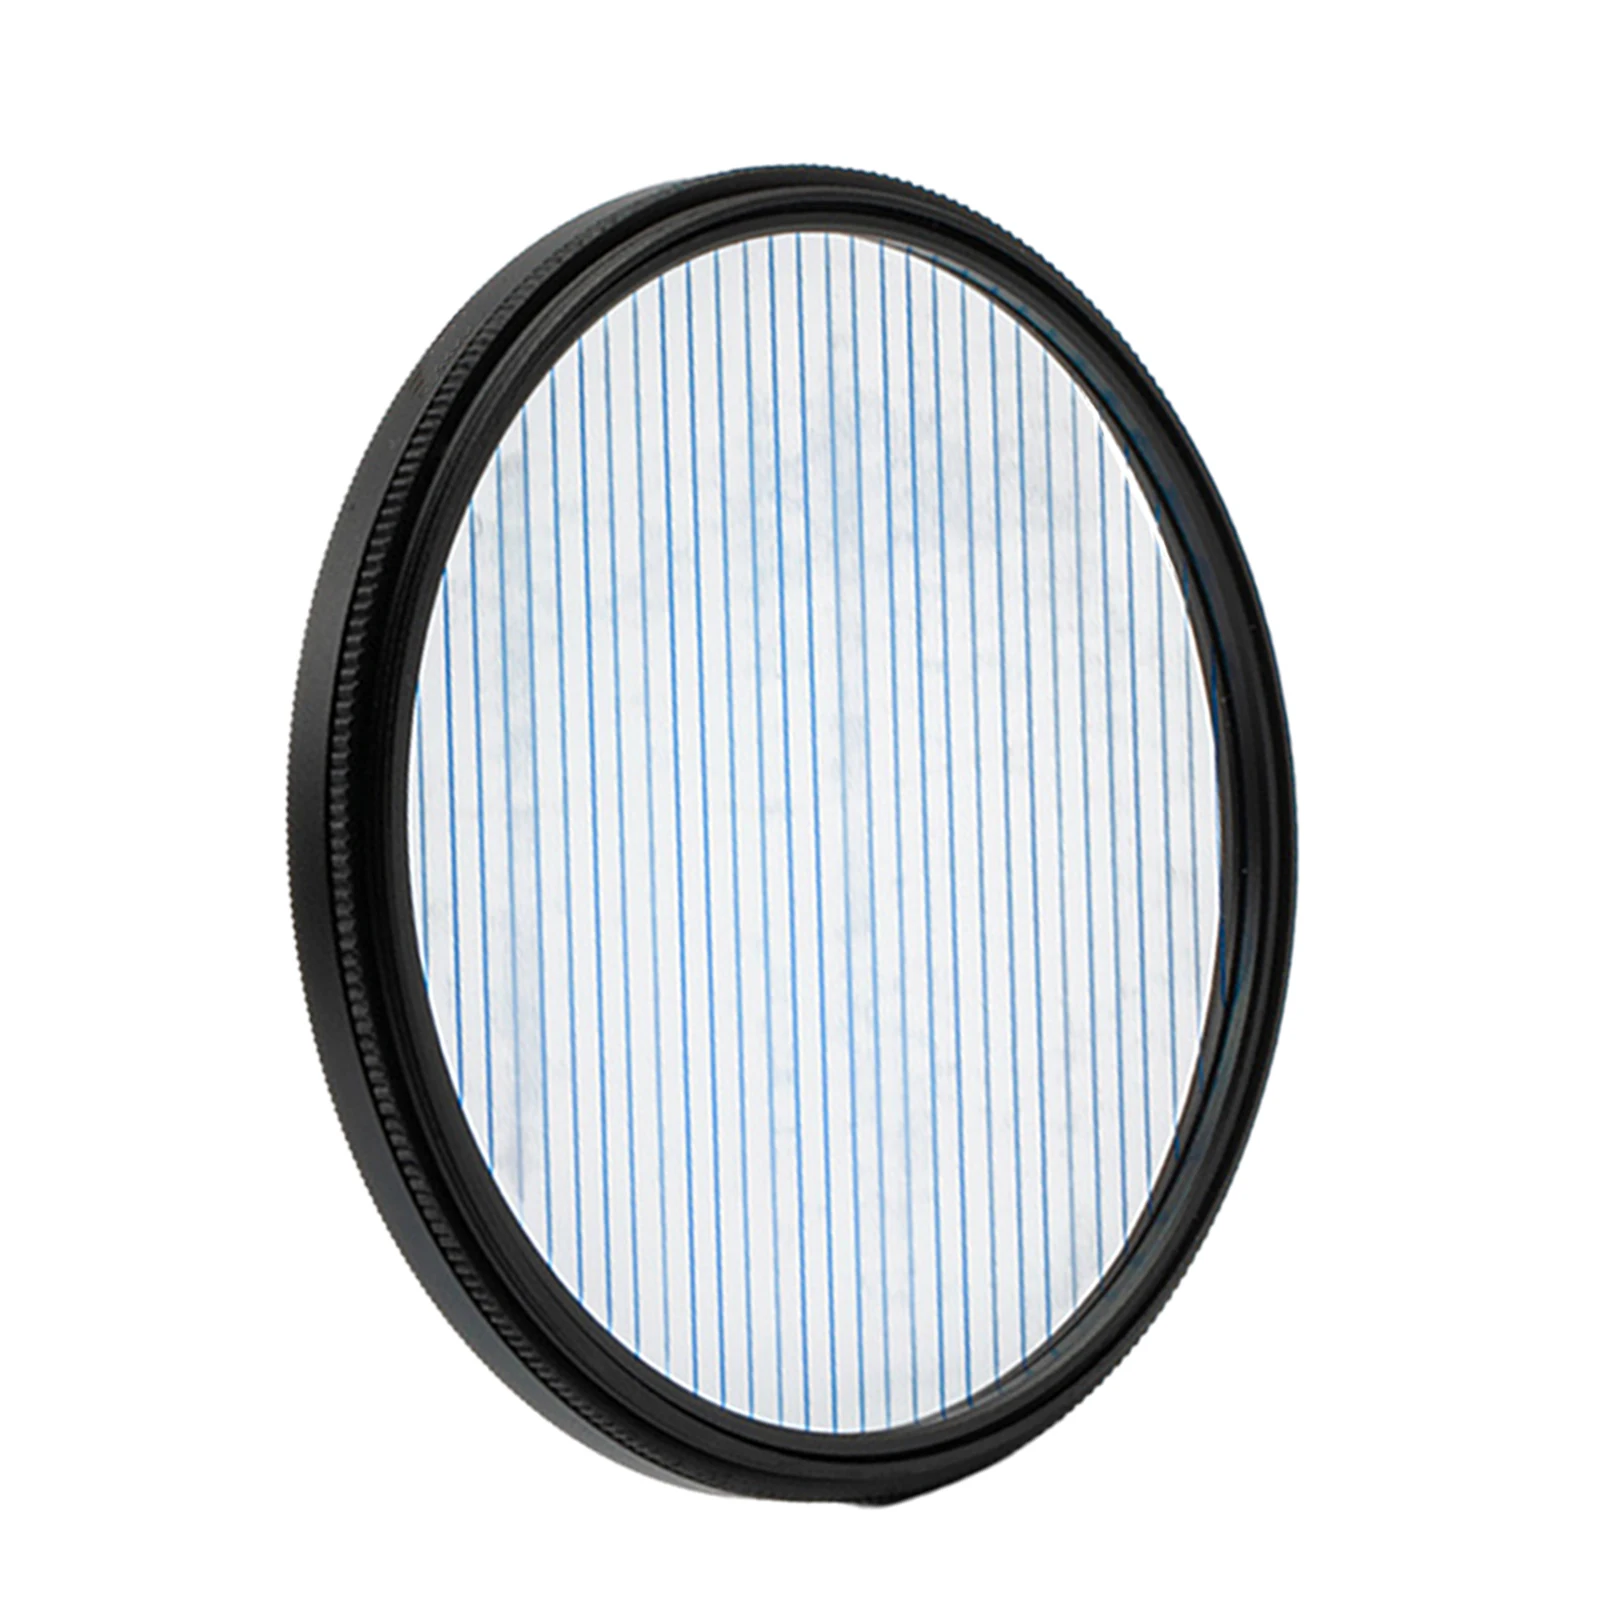 82mm Rainbow Streak Homyl Blue Rainbow Streak Filter Special Effects Filter Anamorphic Optical Glass w/Rotating Ring for DSLR Cinematice Video Camera Accessories 